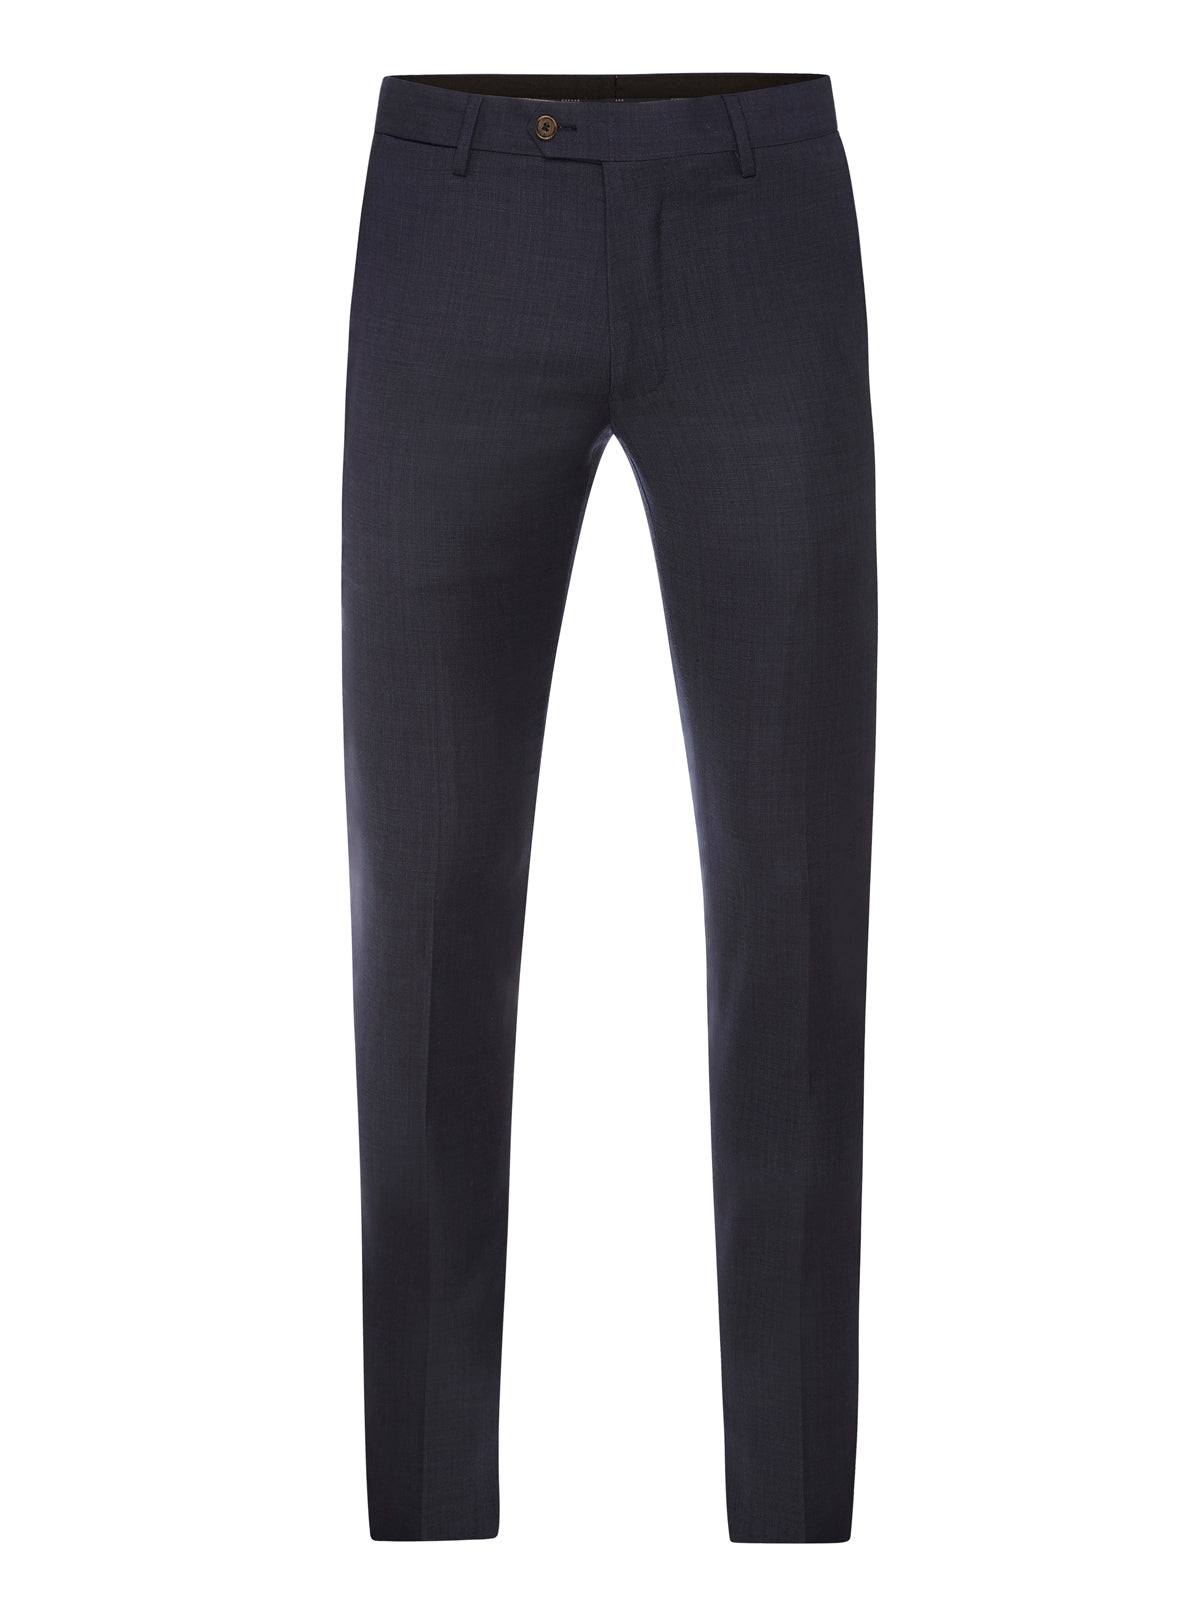 Burberry Charcoal Grey Wool English Fit Tailored Trousers With Belt Detail,  Brand Size 46 (Waist Size 31.1